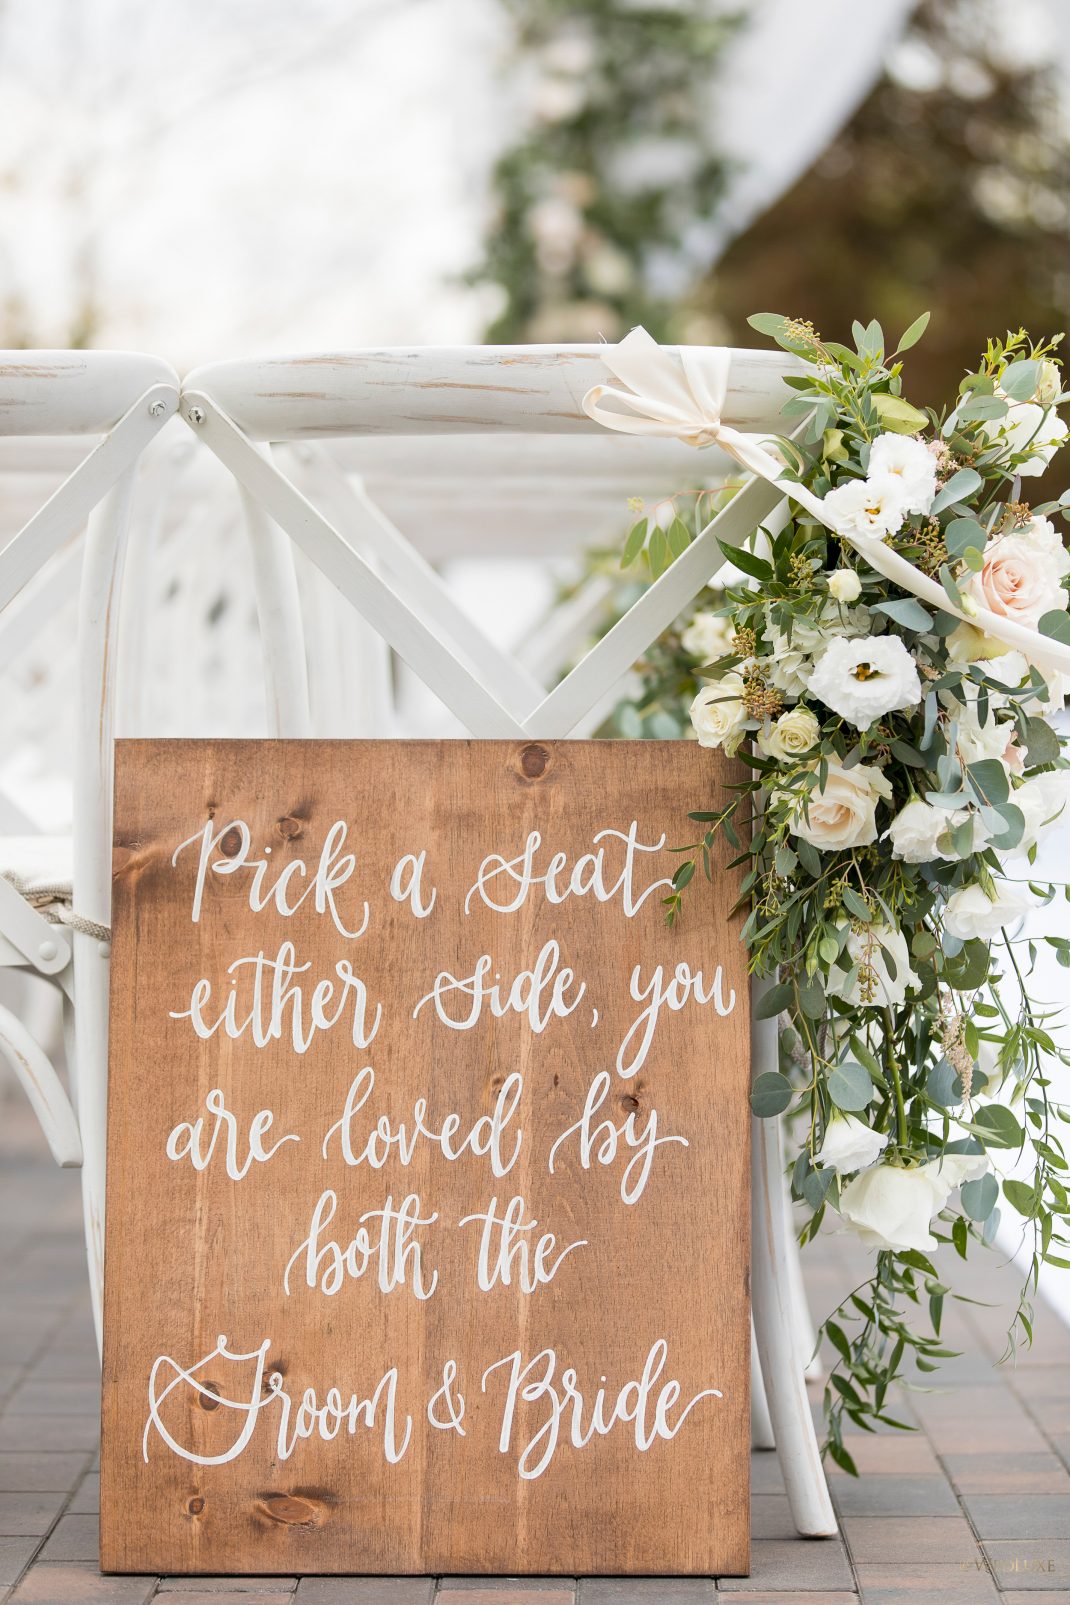 Rustic wood pick a seat sign for outdoor ceremony